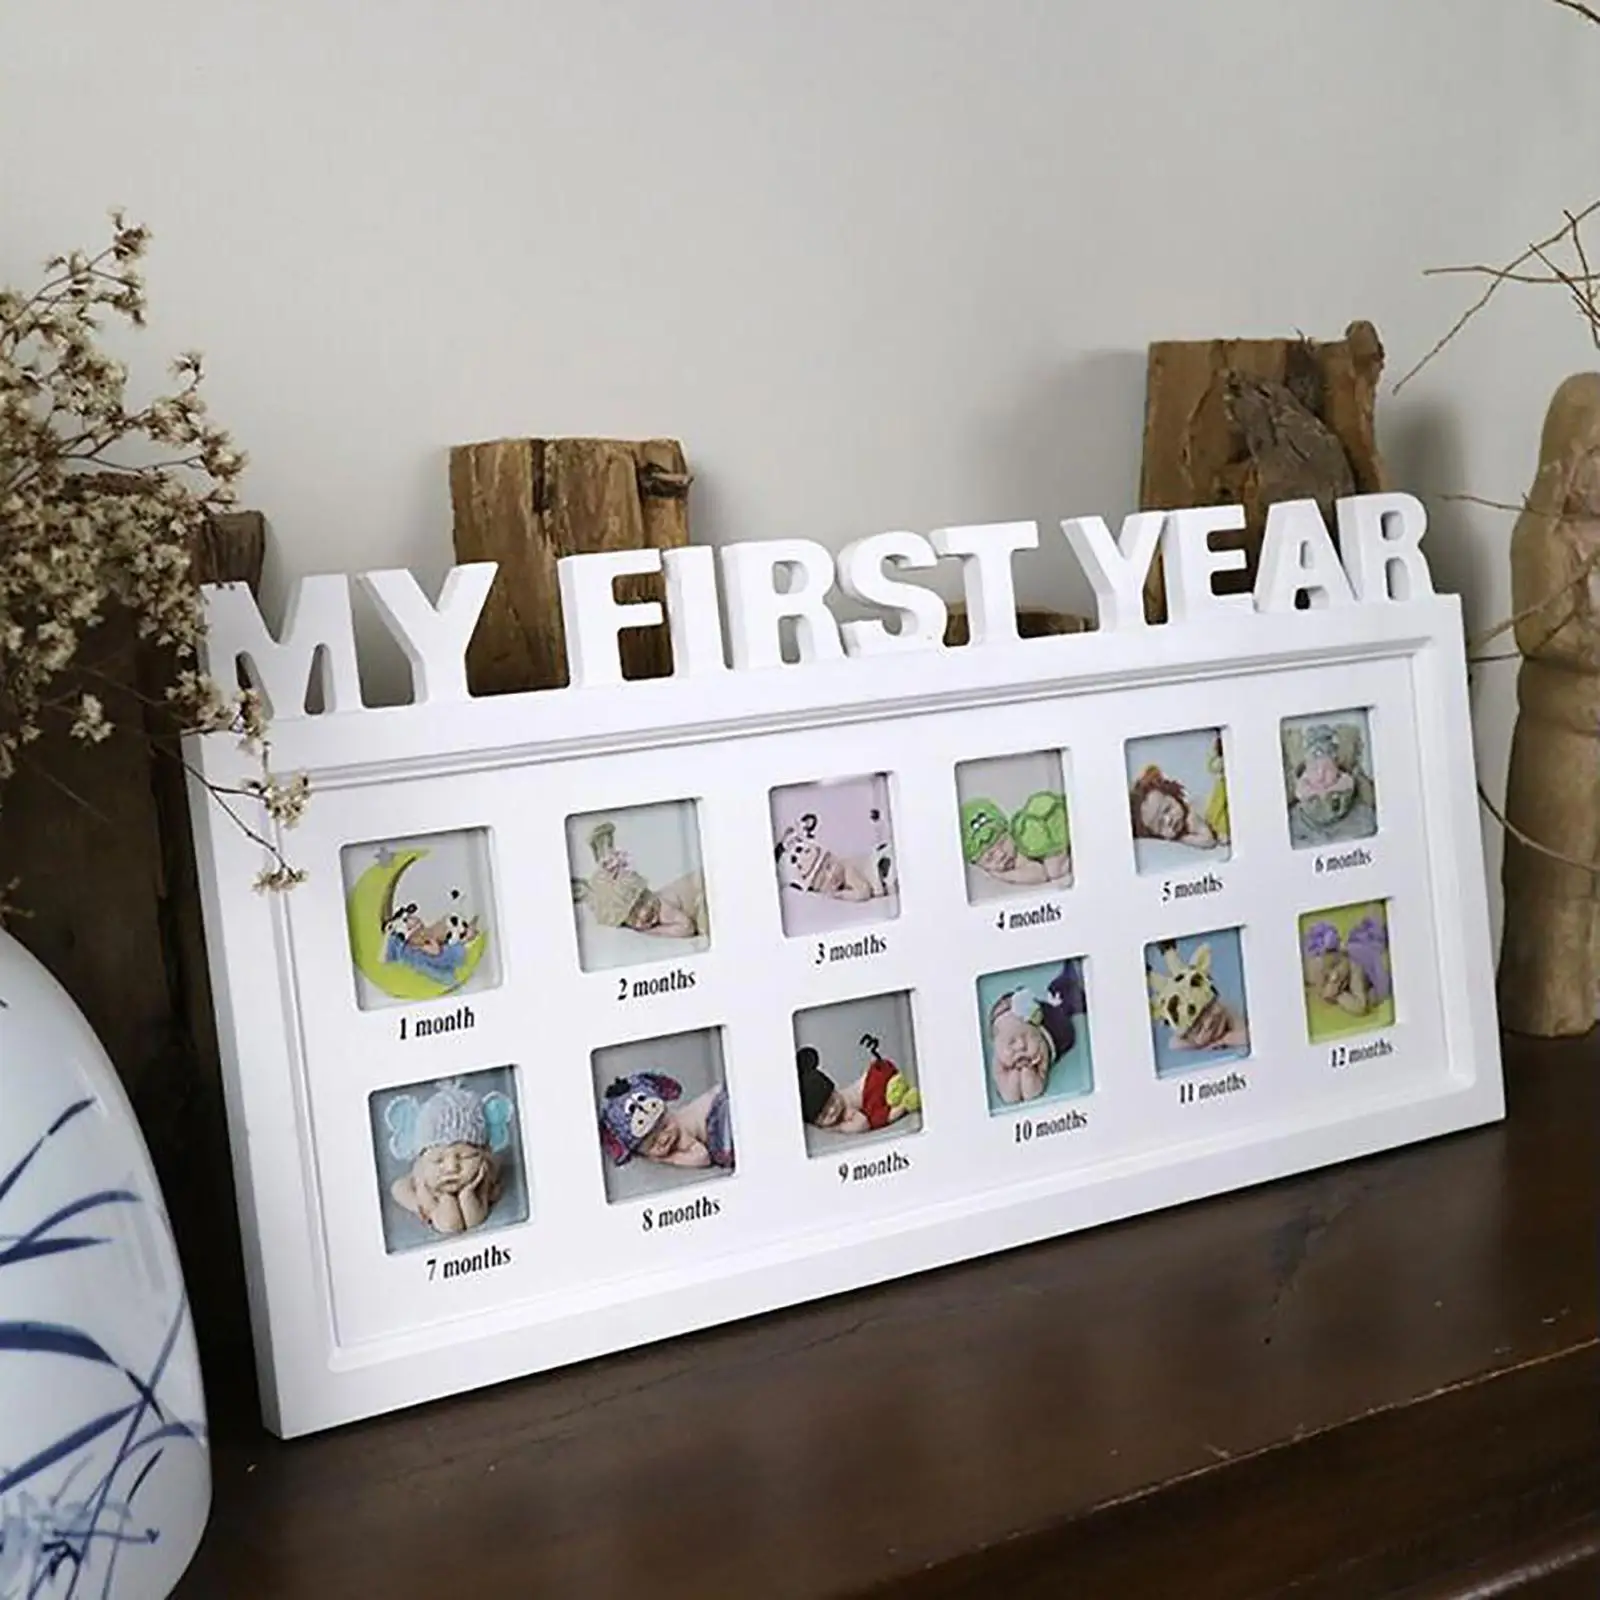 Baby Photo Frame Picture Frame Children Memories My First Year Photo Frame Gift